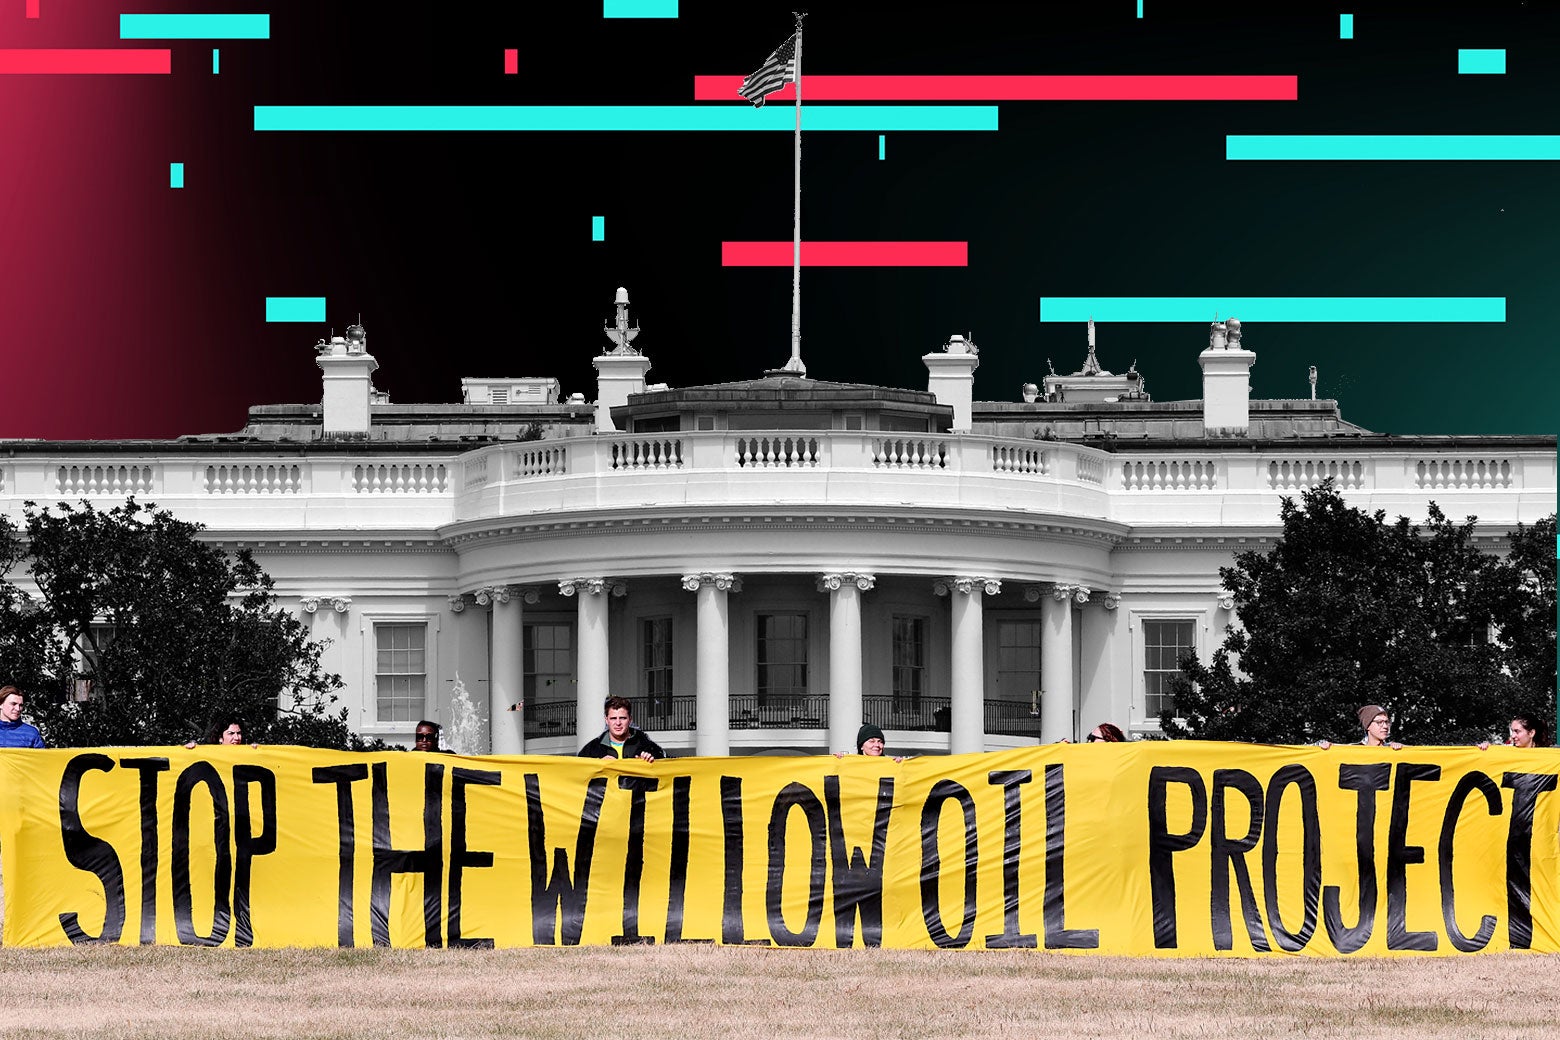 Protesters hold a banner reading "STOP THE WILLOW OIL PROJECT" in front of the White House. Horizontal lines with TikTok-branding colors hover in the background against a black sky.